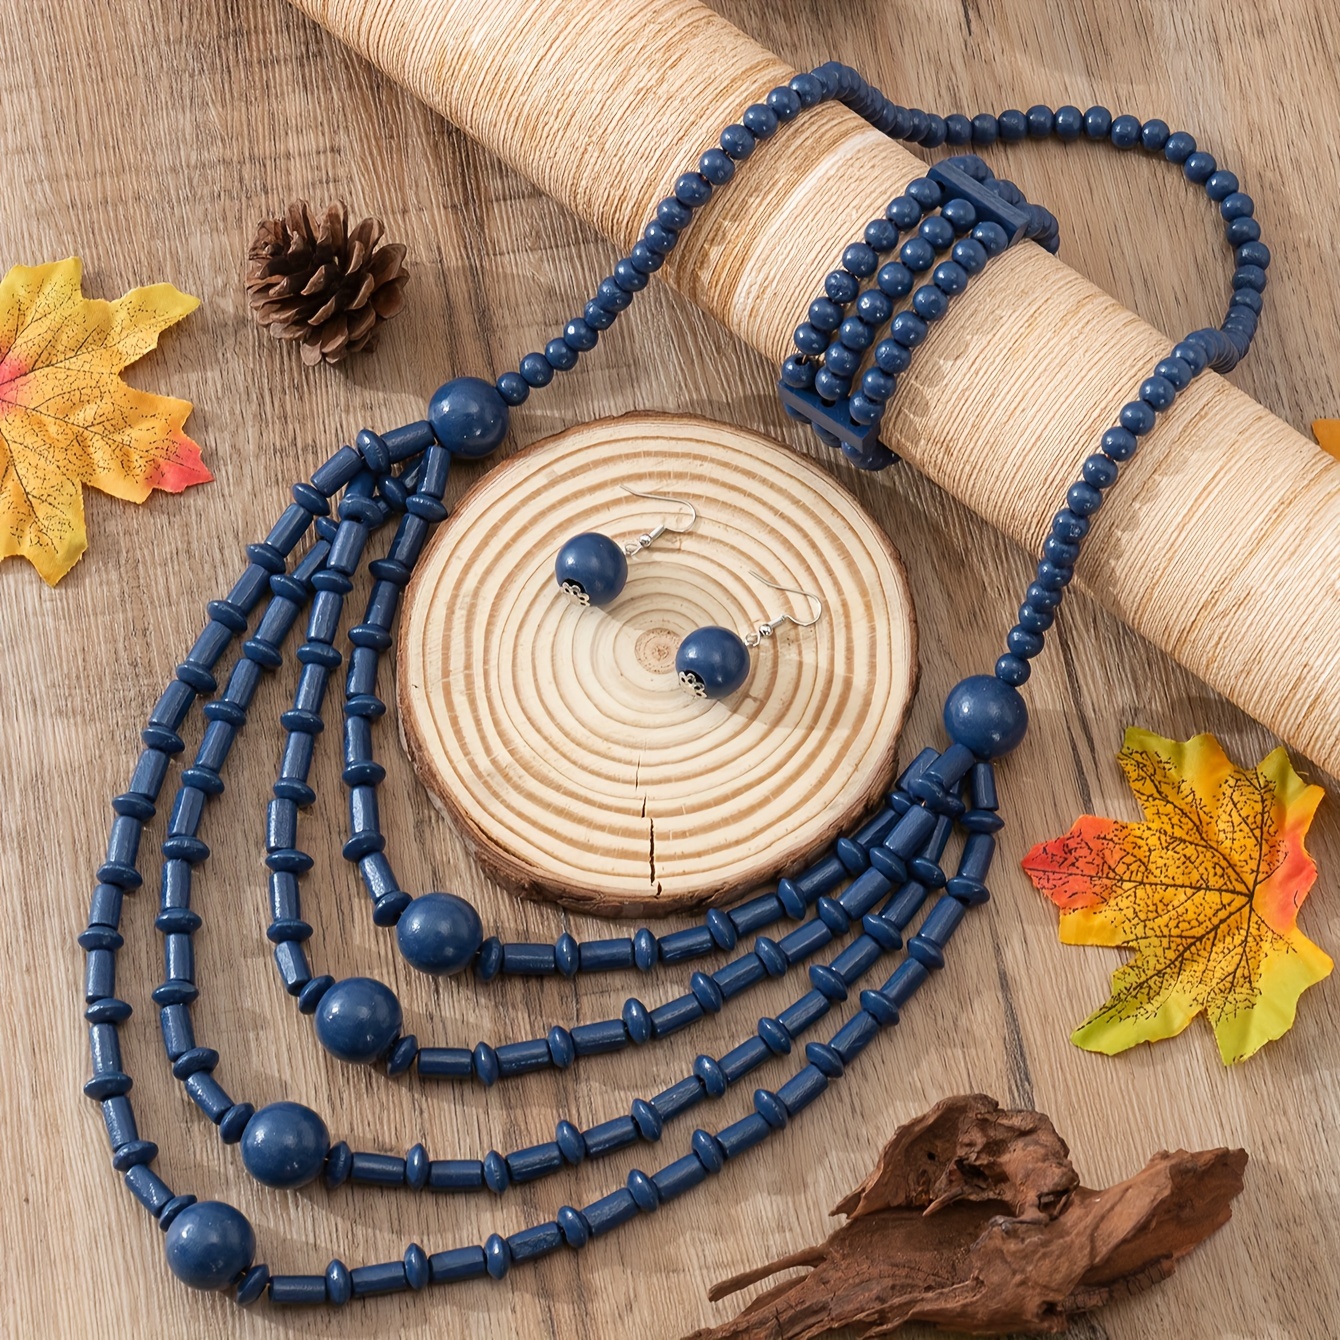 4pcs Earrings + Bracelet + Necklace Boho Style Jewelry, Jewels Set Made of Wooden Beads Match Daily Outfits Party Accessories,Women's Jewelry,Temu